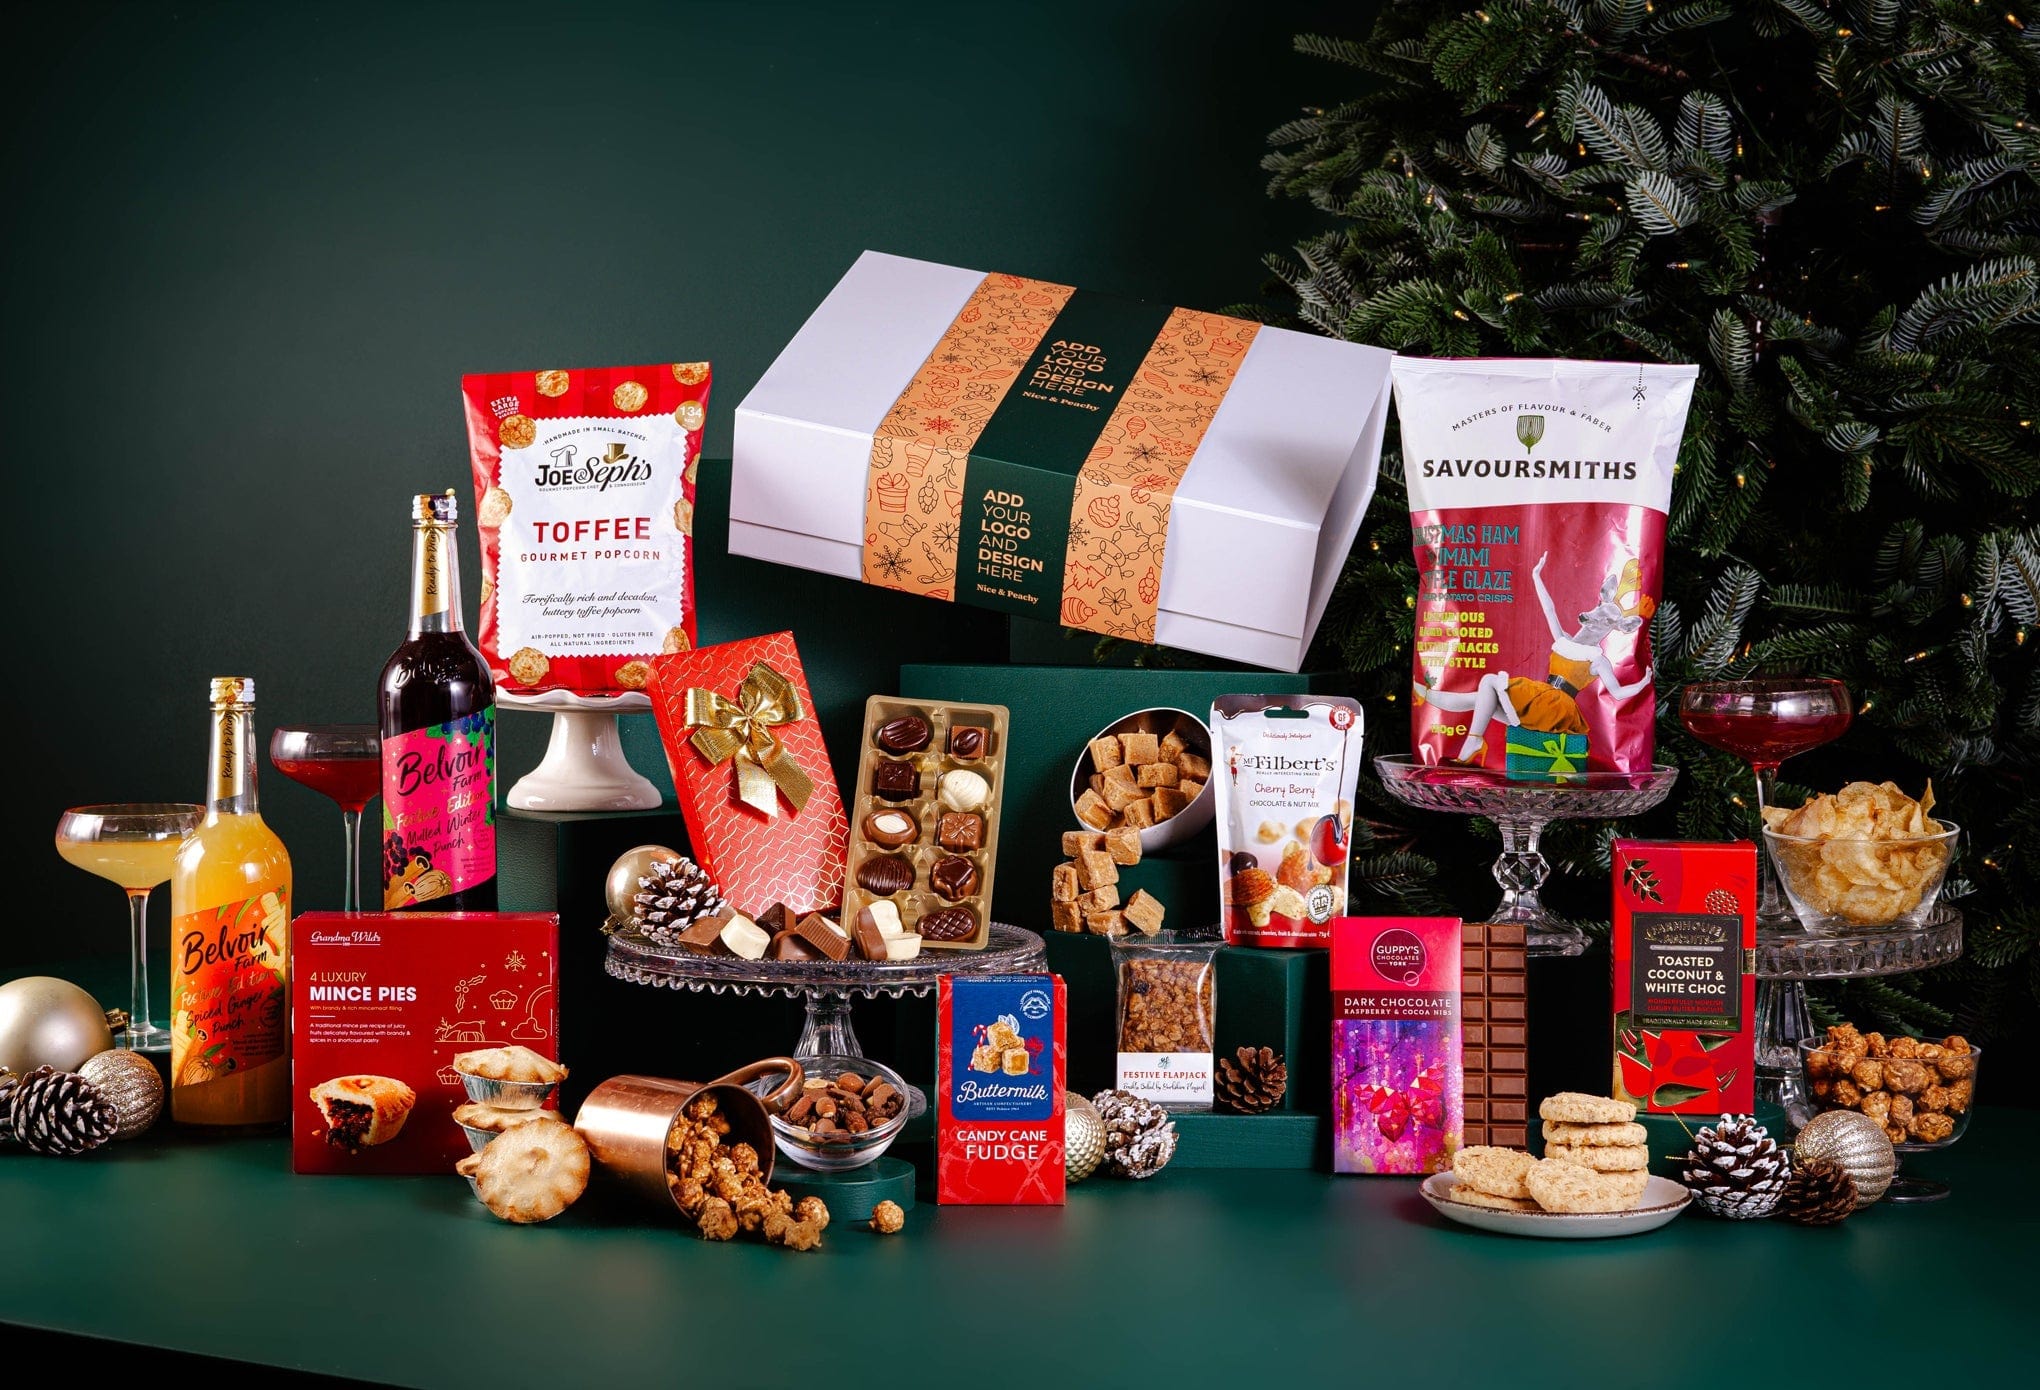 Peach Hampers Corporate Hampers Alcohol-Free Duo The Christmas Delights Hamper